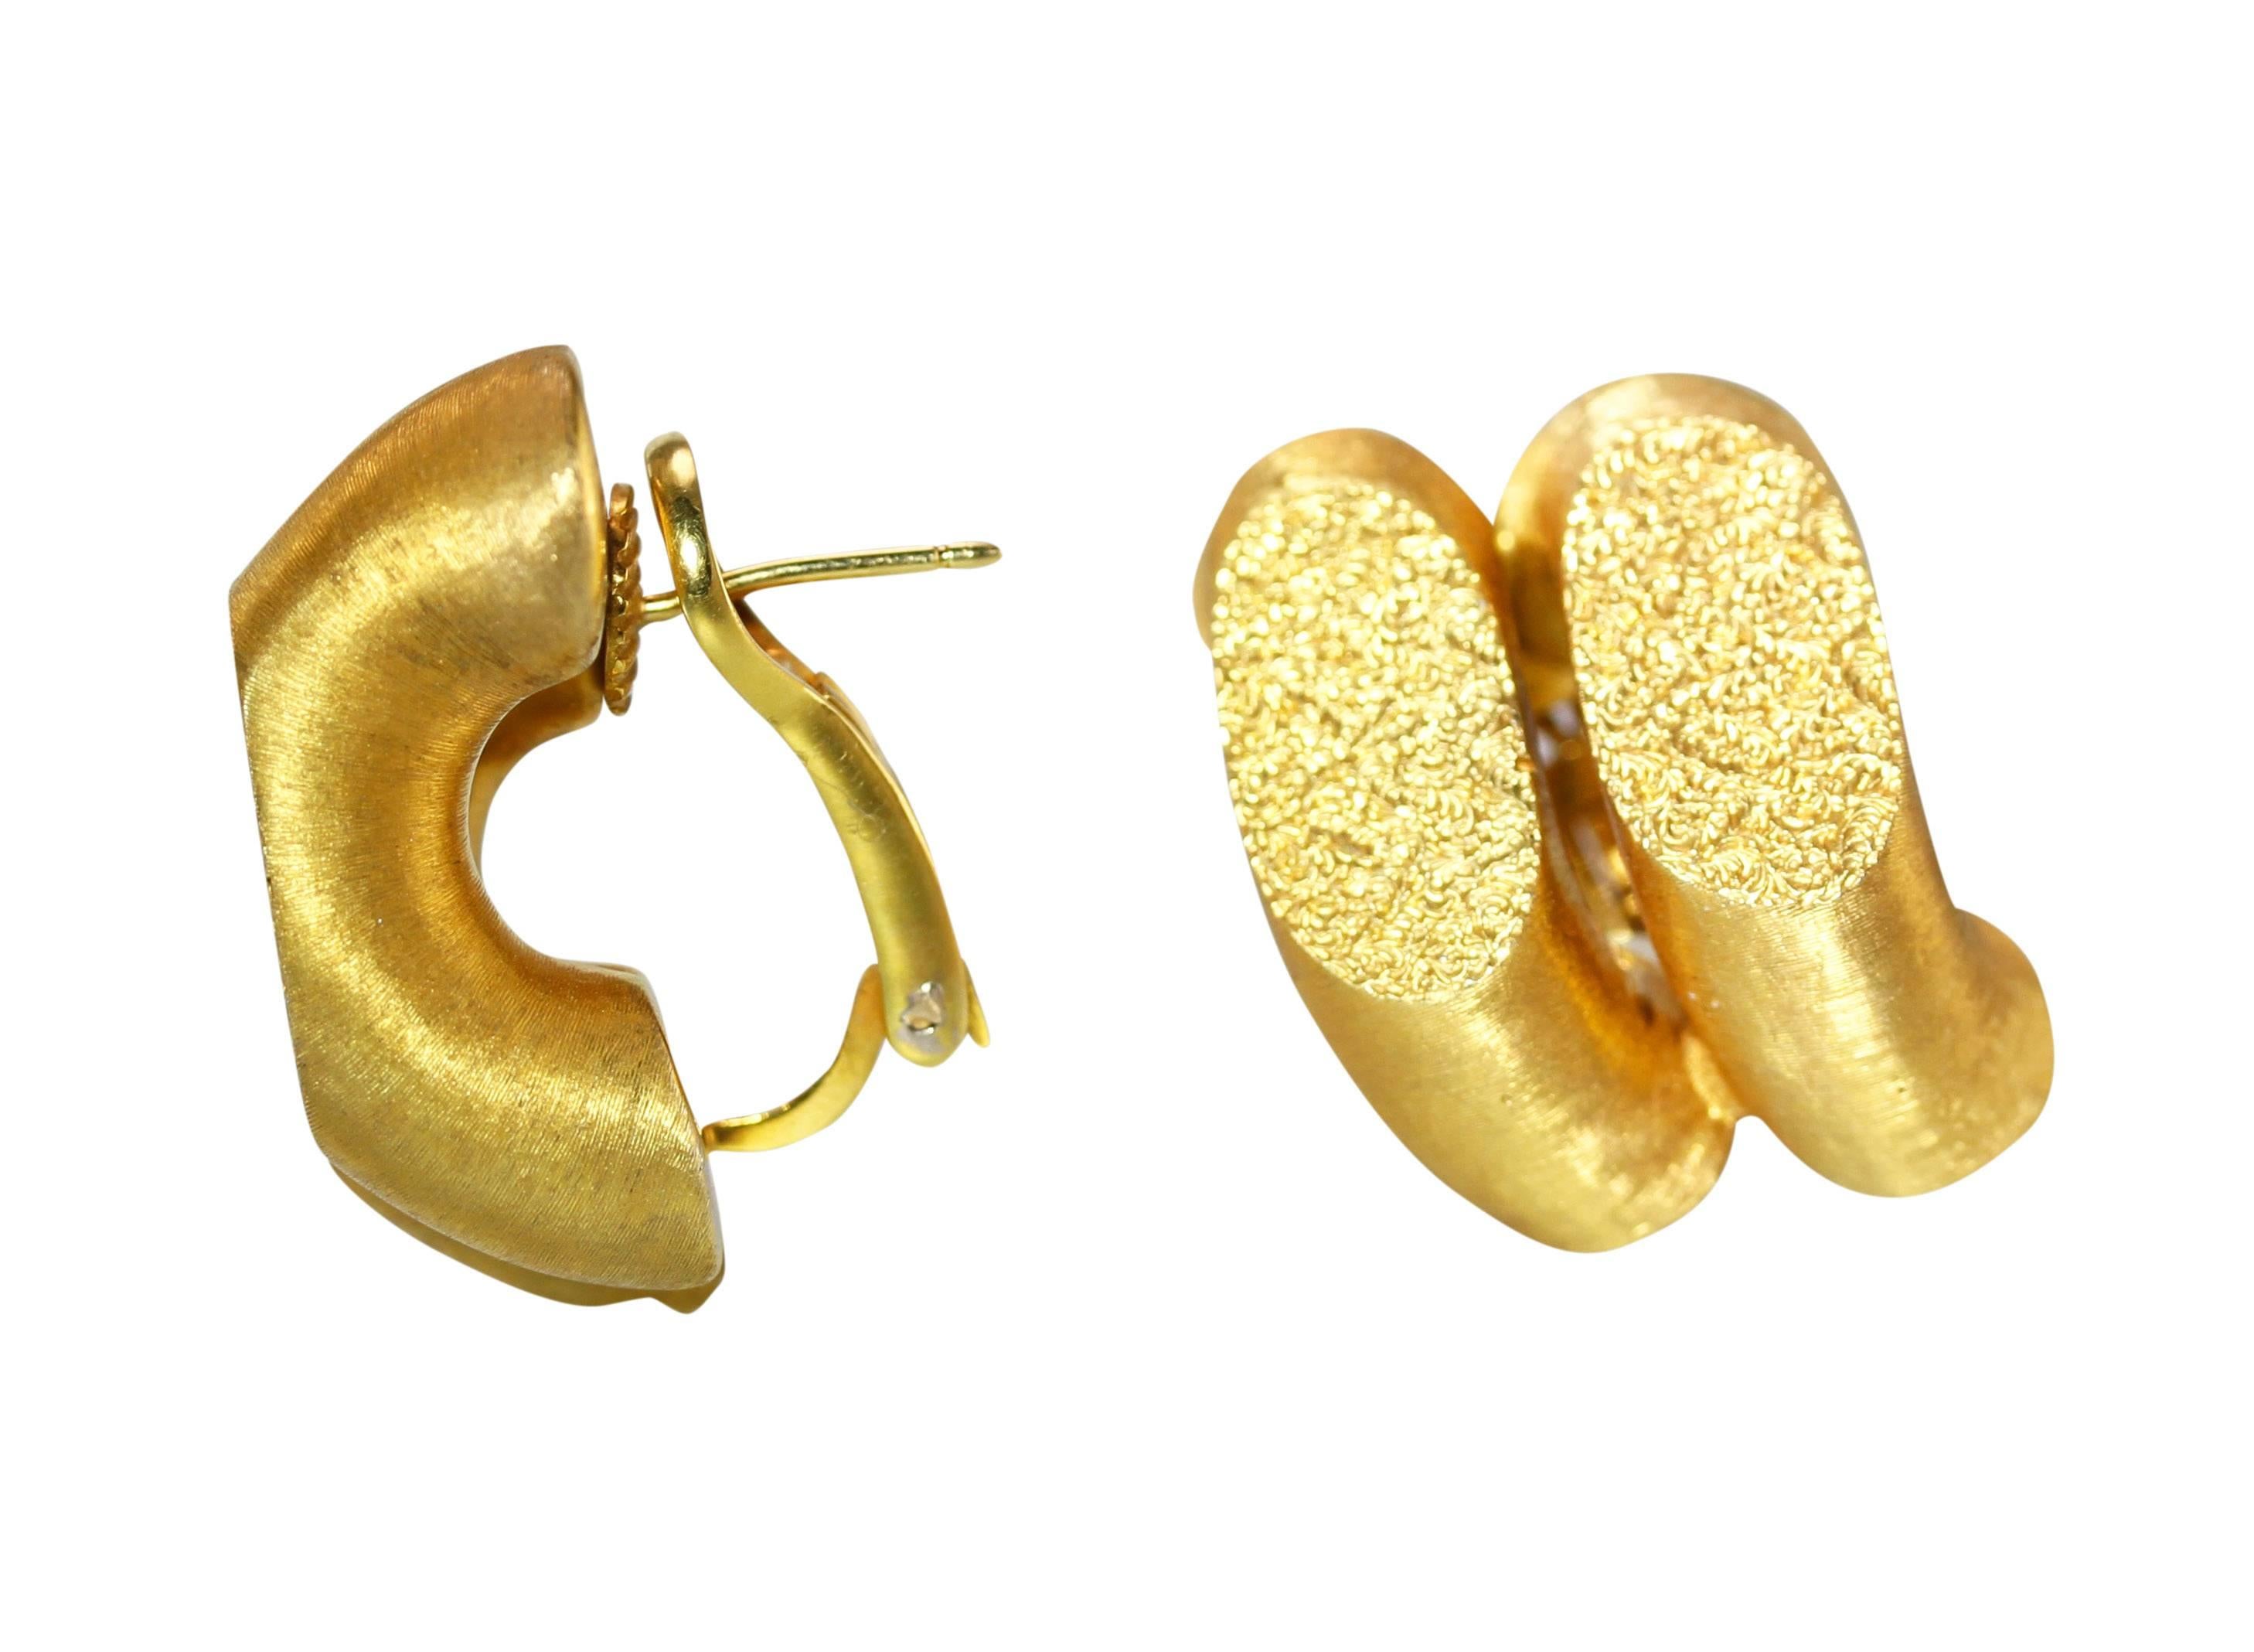 Pair of 18 Karat Gold 'Torchon' Earclips by Buccellati, Italy
• Signed Buccellati, Italy, 18K
• Measuring 1 1/4 by 7/8 inches, gross weight 28.2 grams